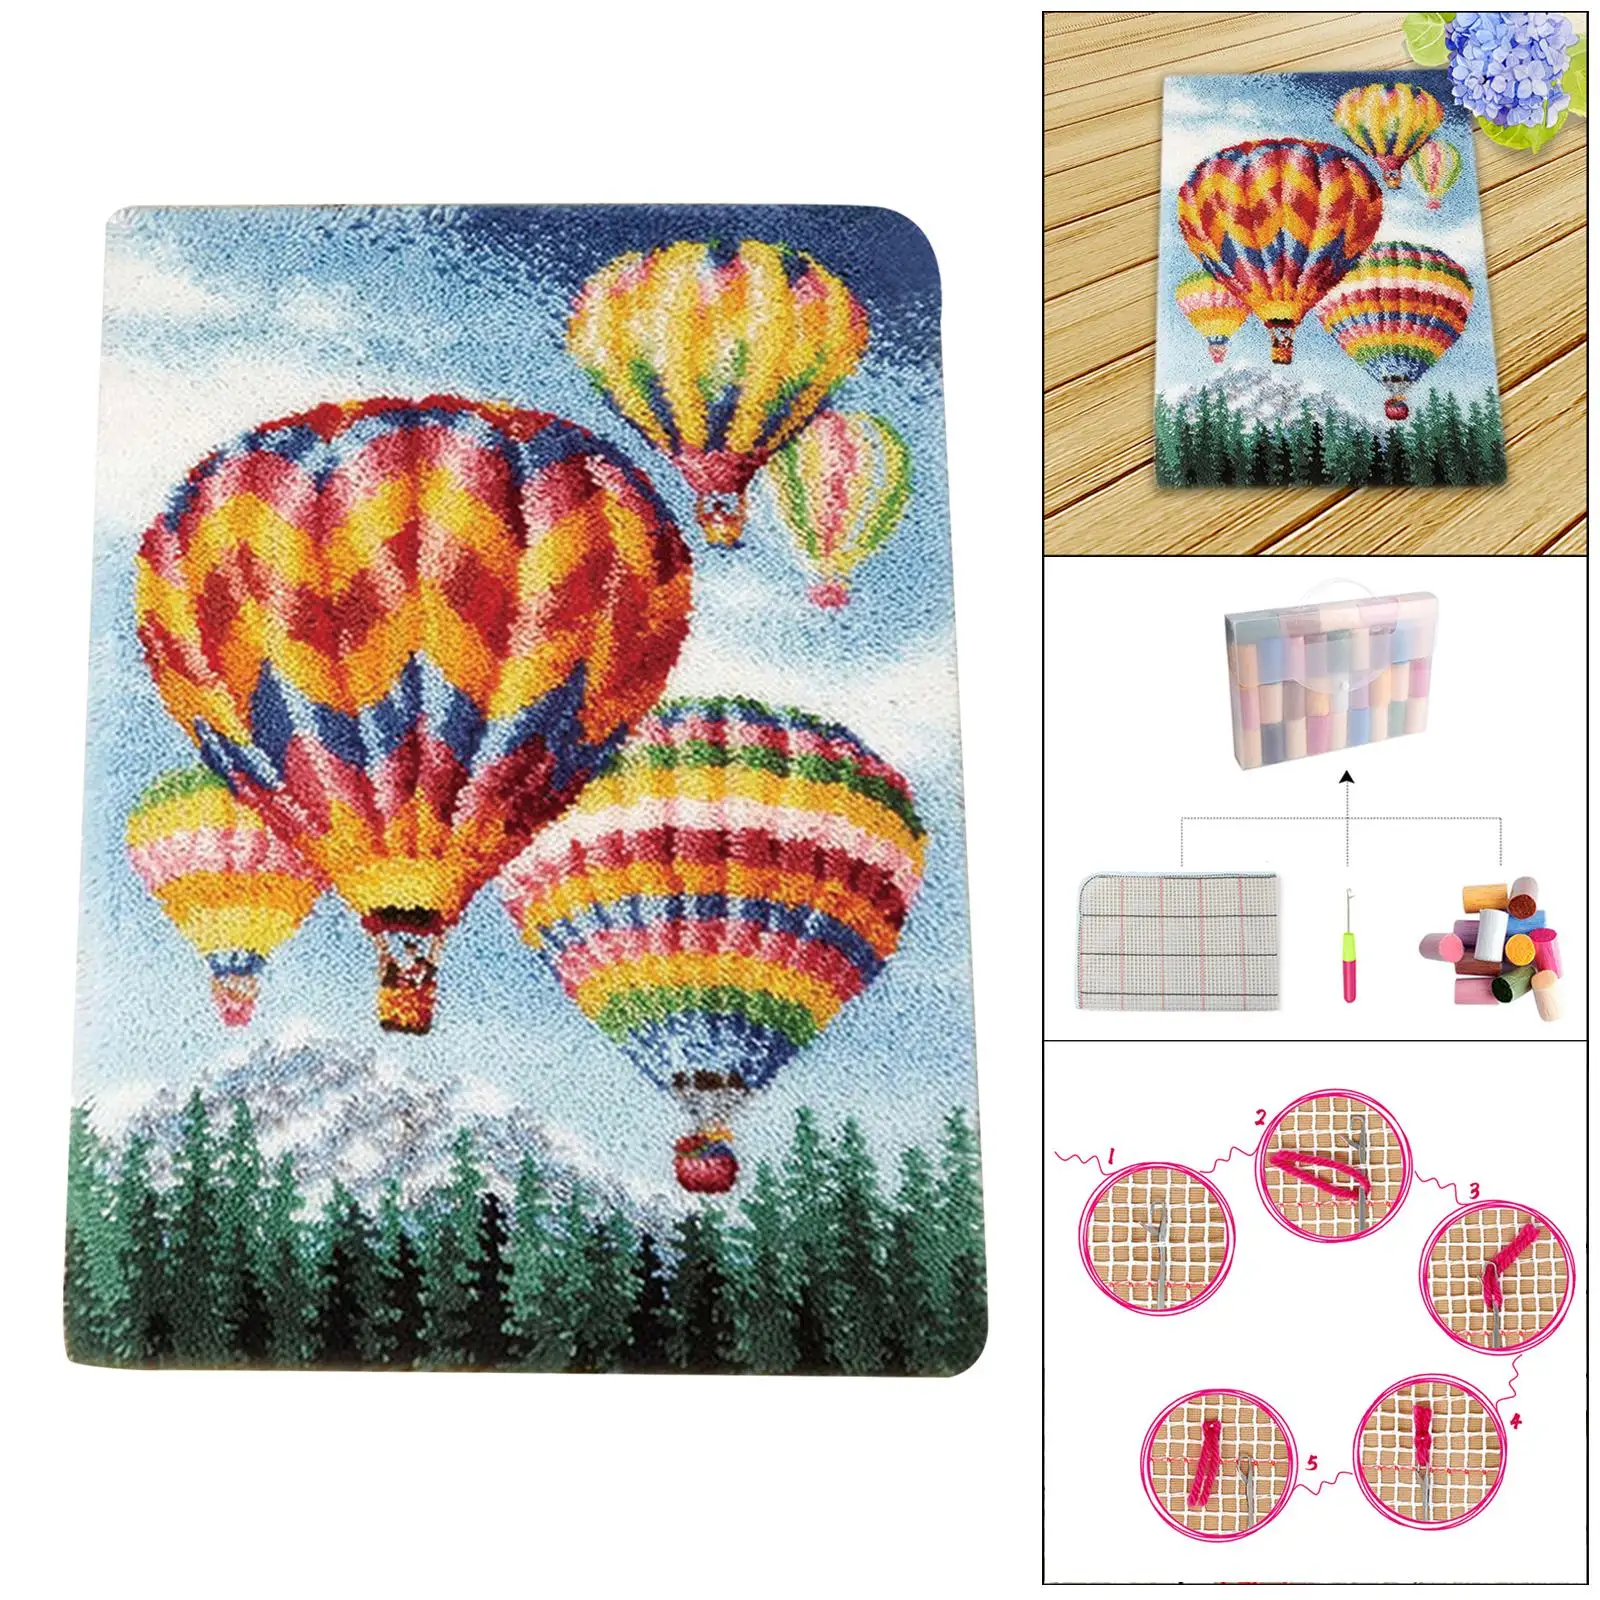  Rug Kits Carpet Embroidery Hot Air Balloon for Adults Kids Crafts